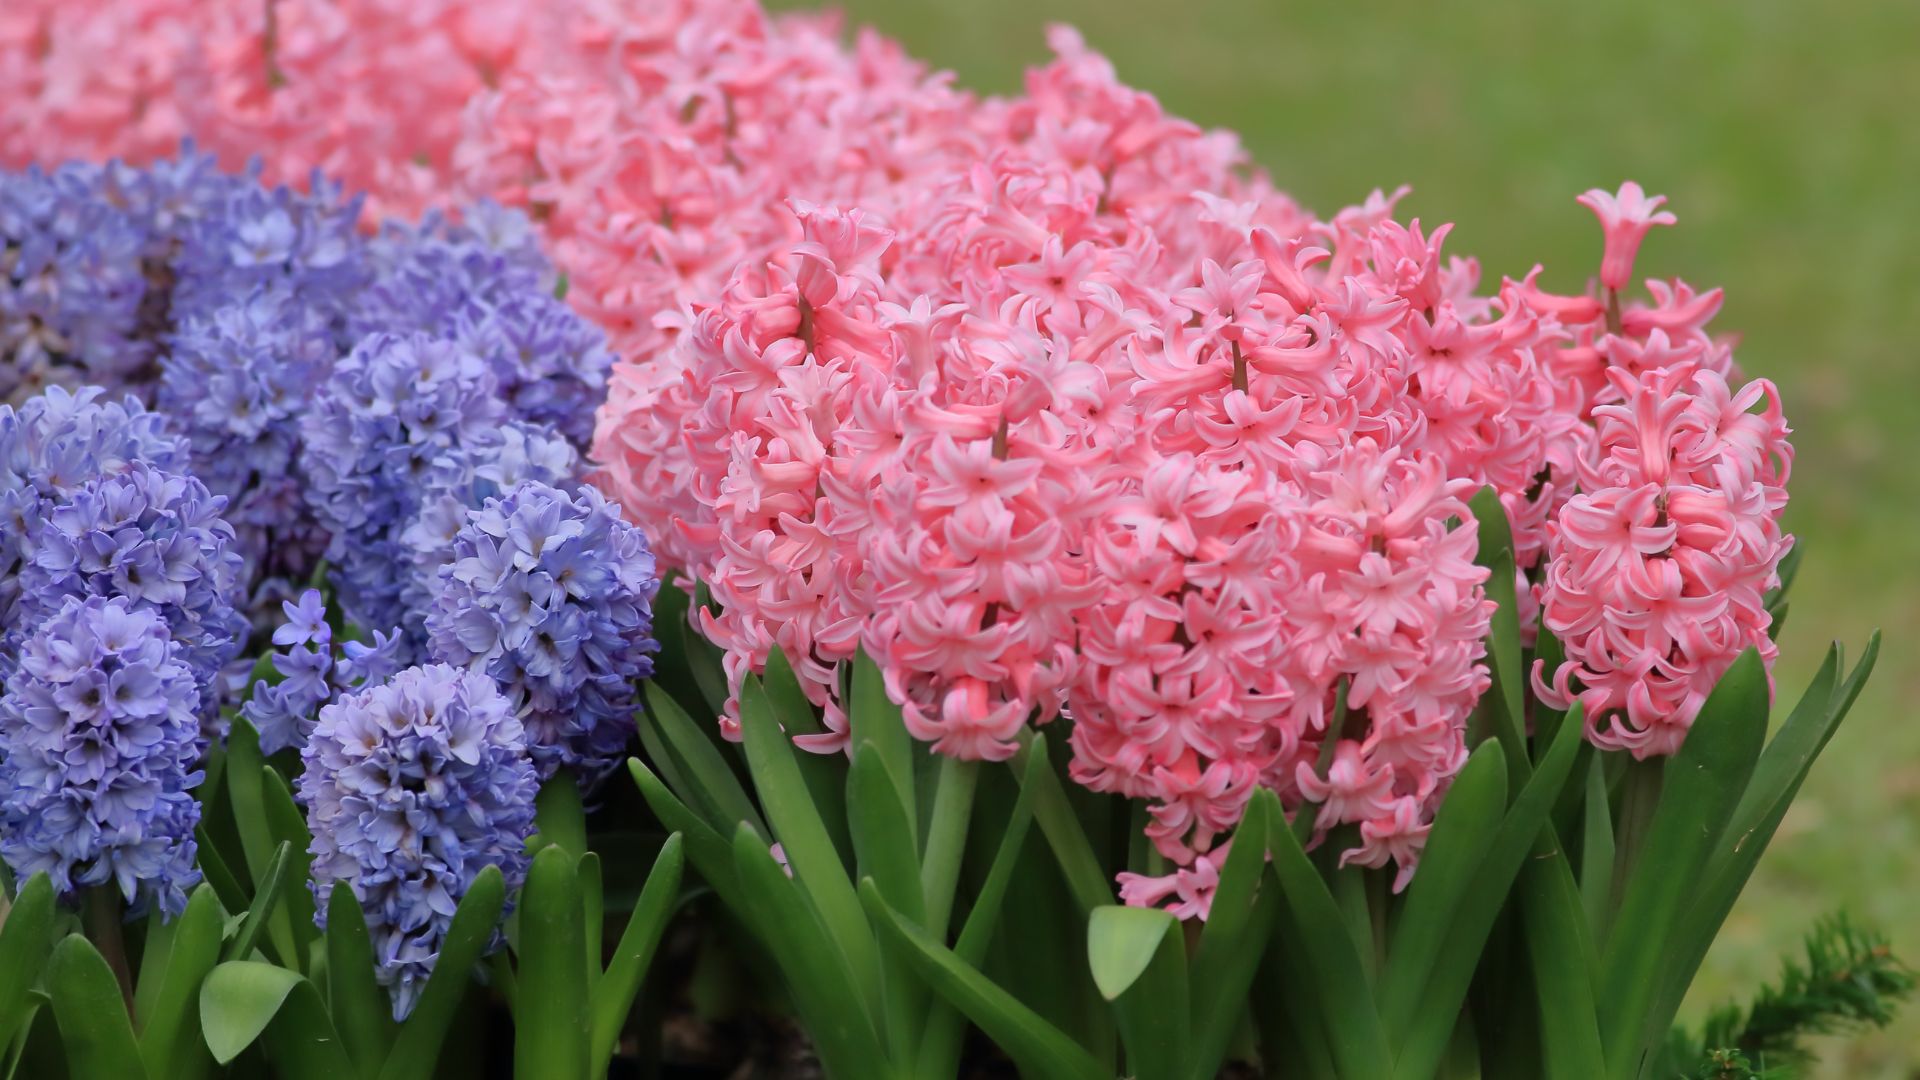 Grow Hyacinths This Way For The Most Beautiful Bloom Display Ever